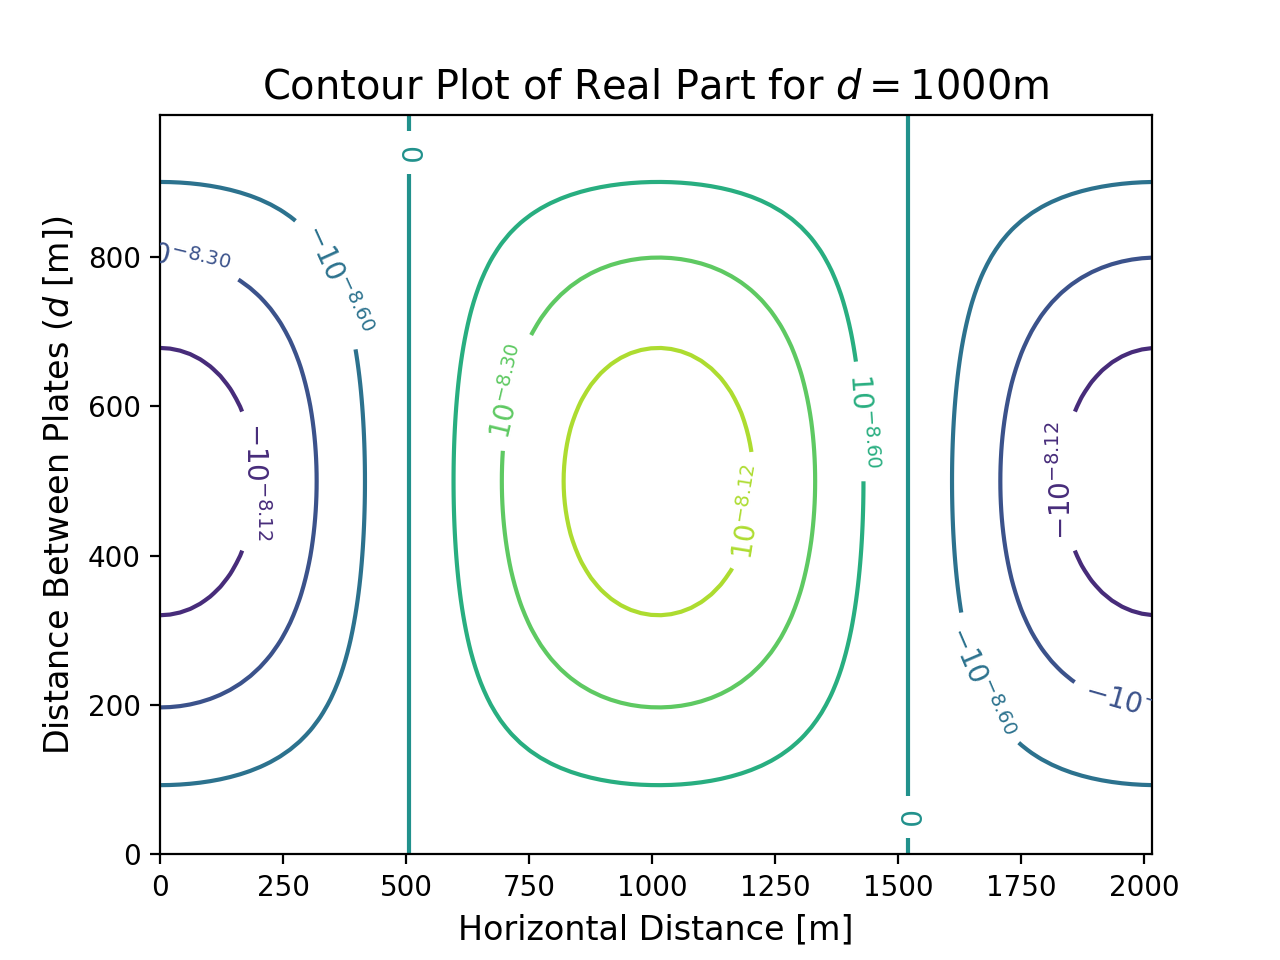 Figure 7. Contour plot of the real part of the temperature perturbation corresponding to the critical eigenvalue, produced for μ=15.98 × 10^(-3) [kg m^(-1) s^(-1)] for d=1000 m. The level heights for each contour line are labelled.